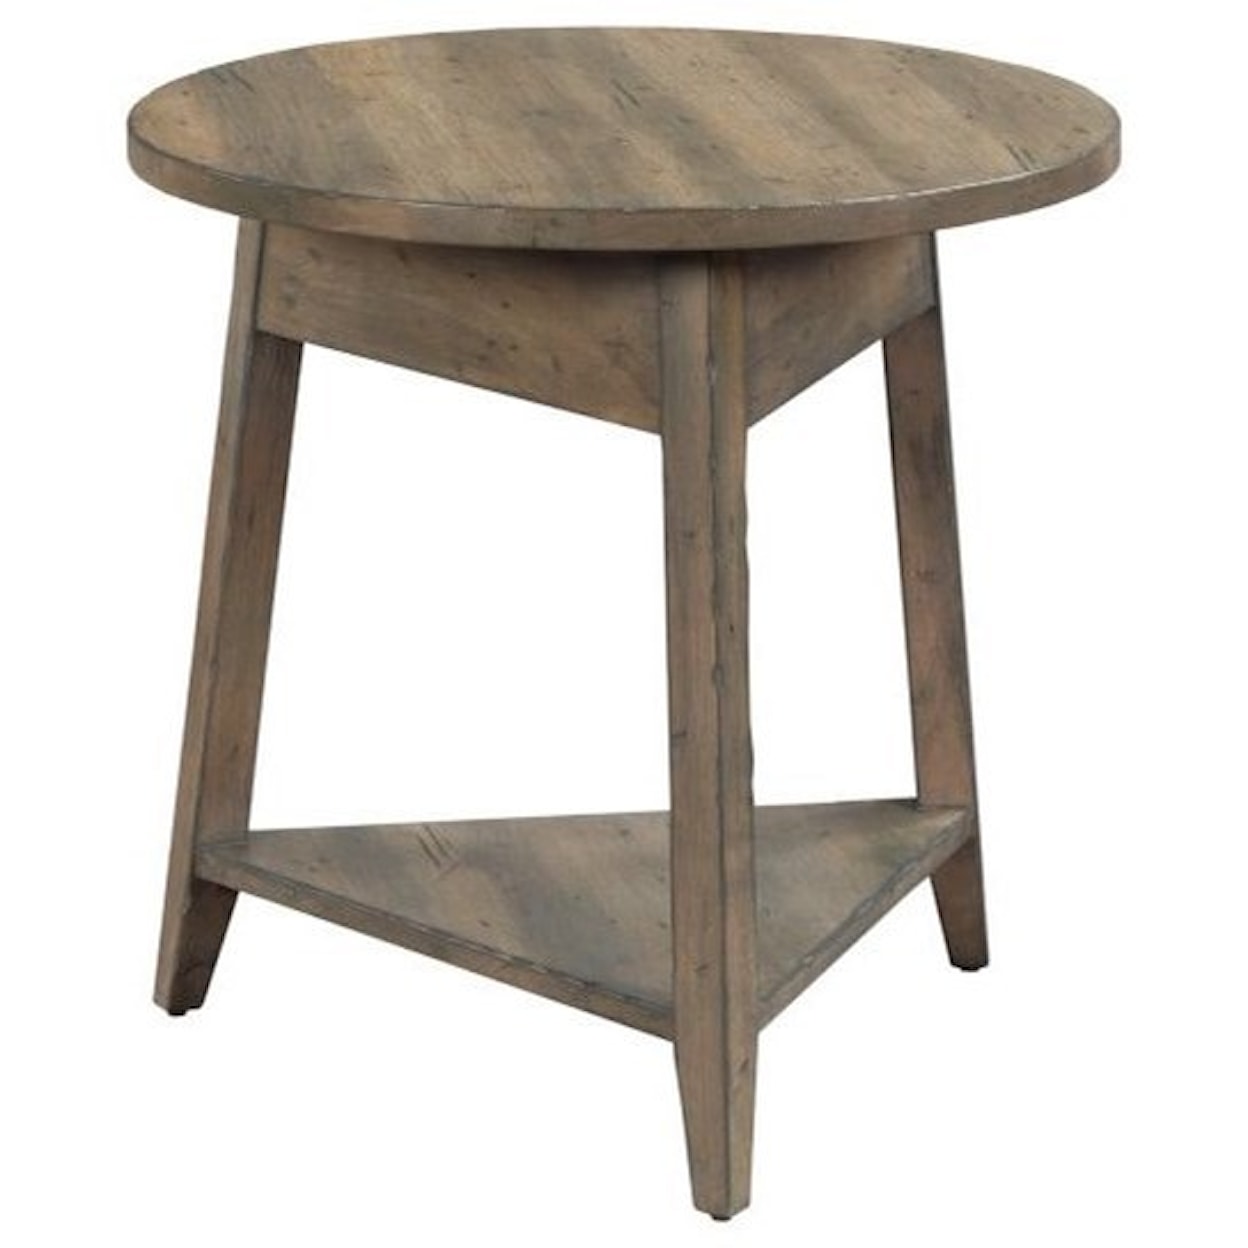 Kincaid Furniture Mill House 24" Bowler End Table